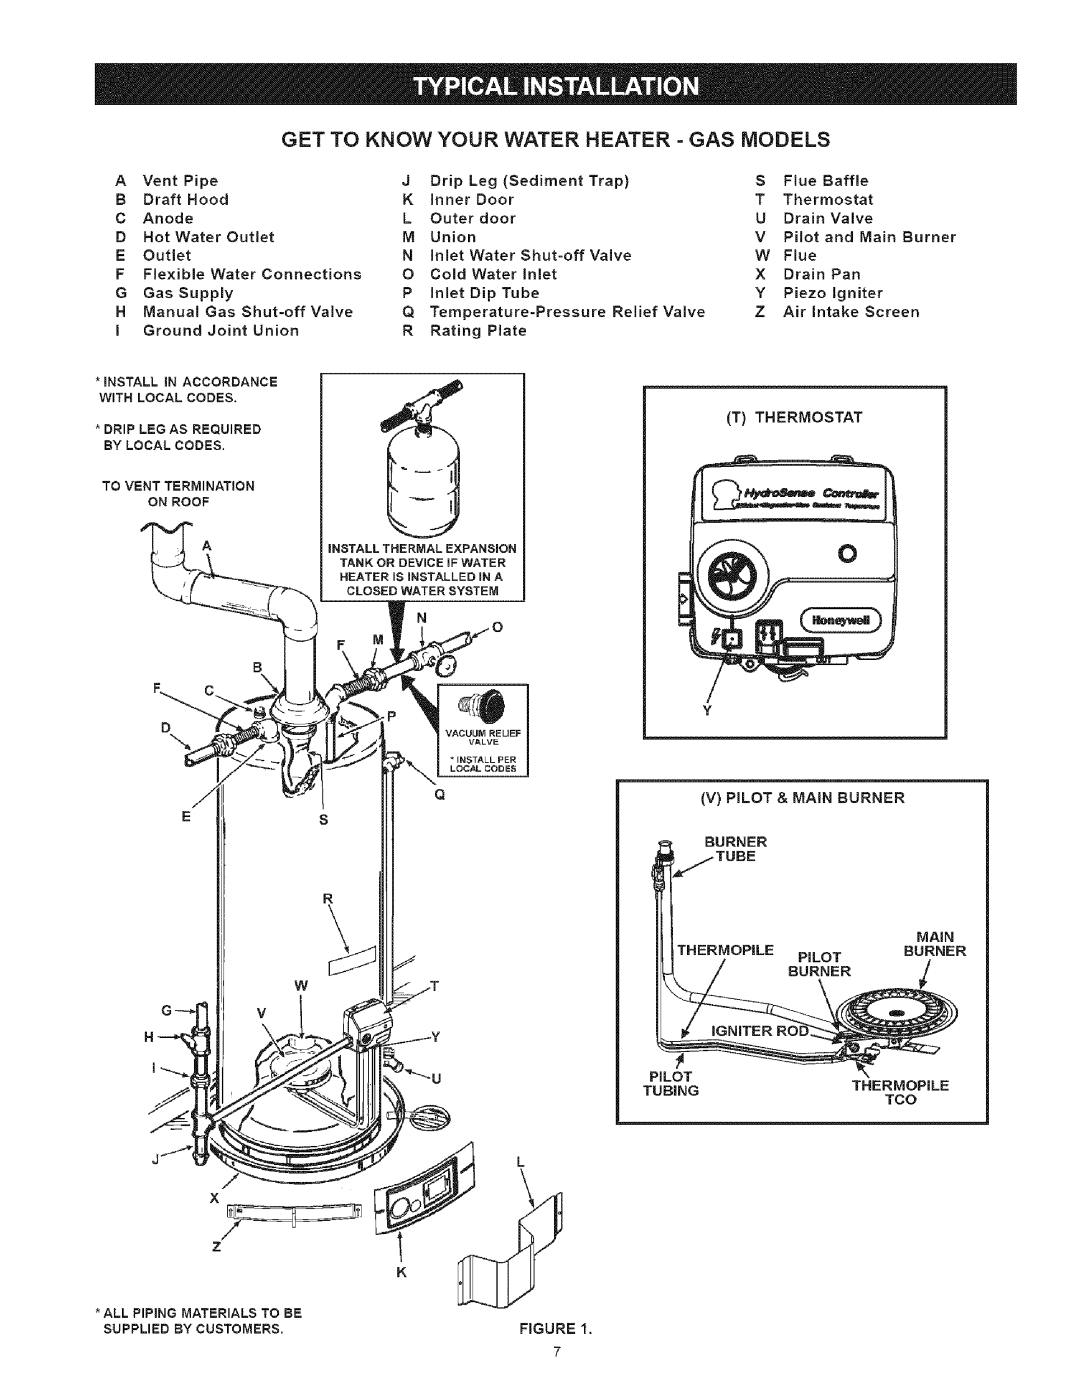 Kenmore 334, 530 owner manual Get To Know Your, Water Heater - Gas Models, T Thermostat, V PILOT & MAiN BURNER, Figure 